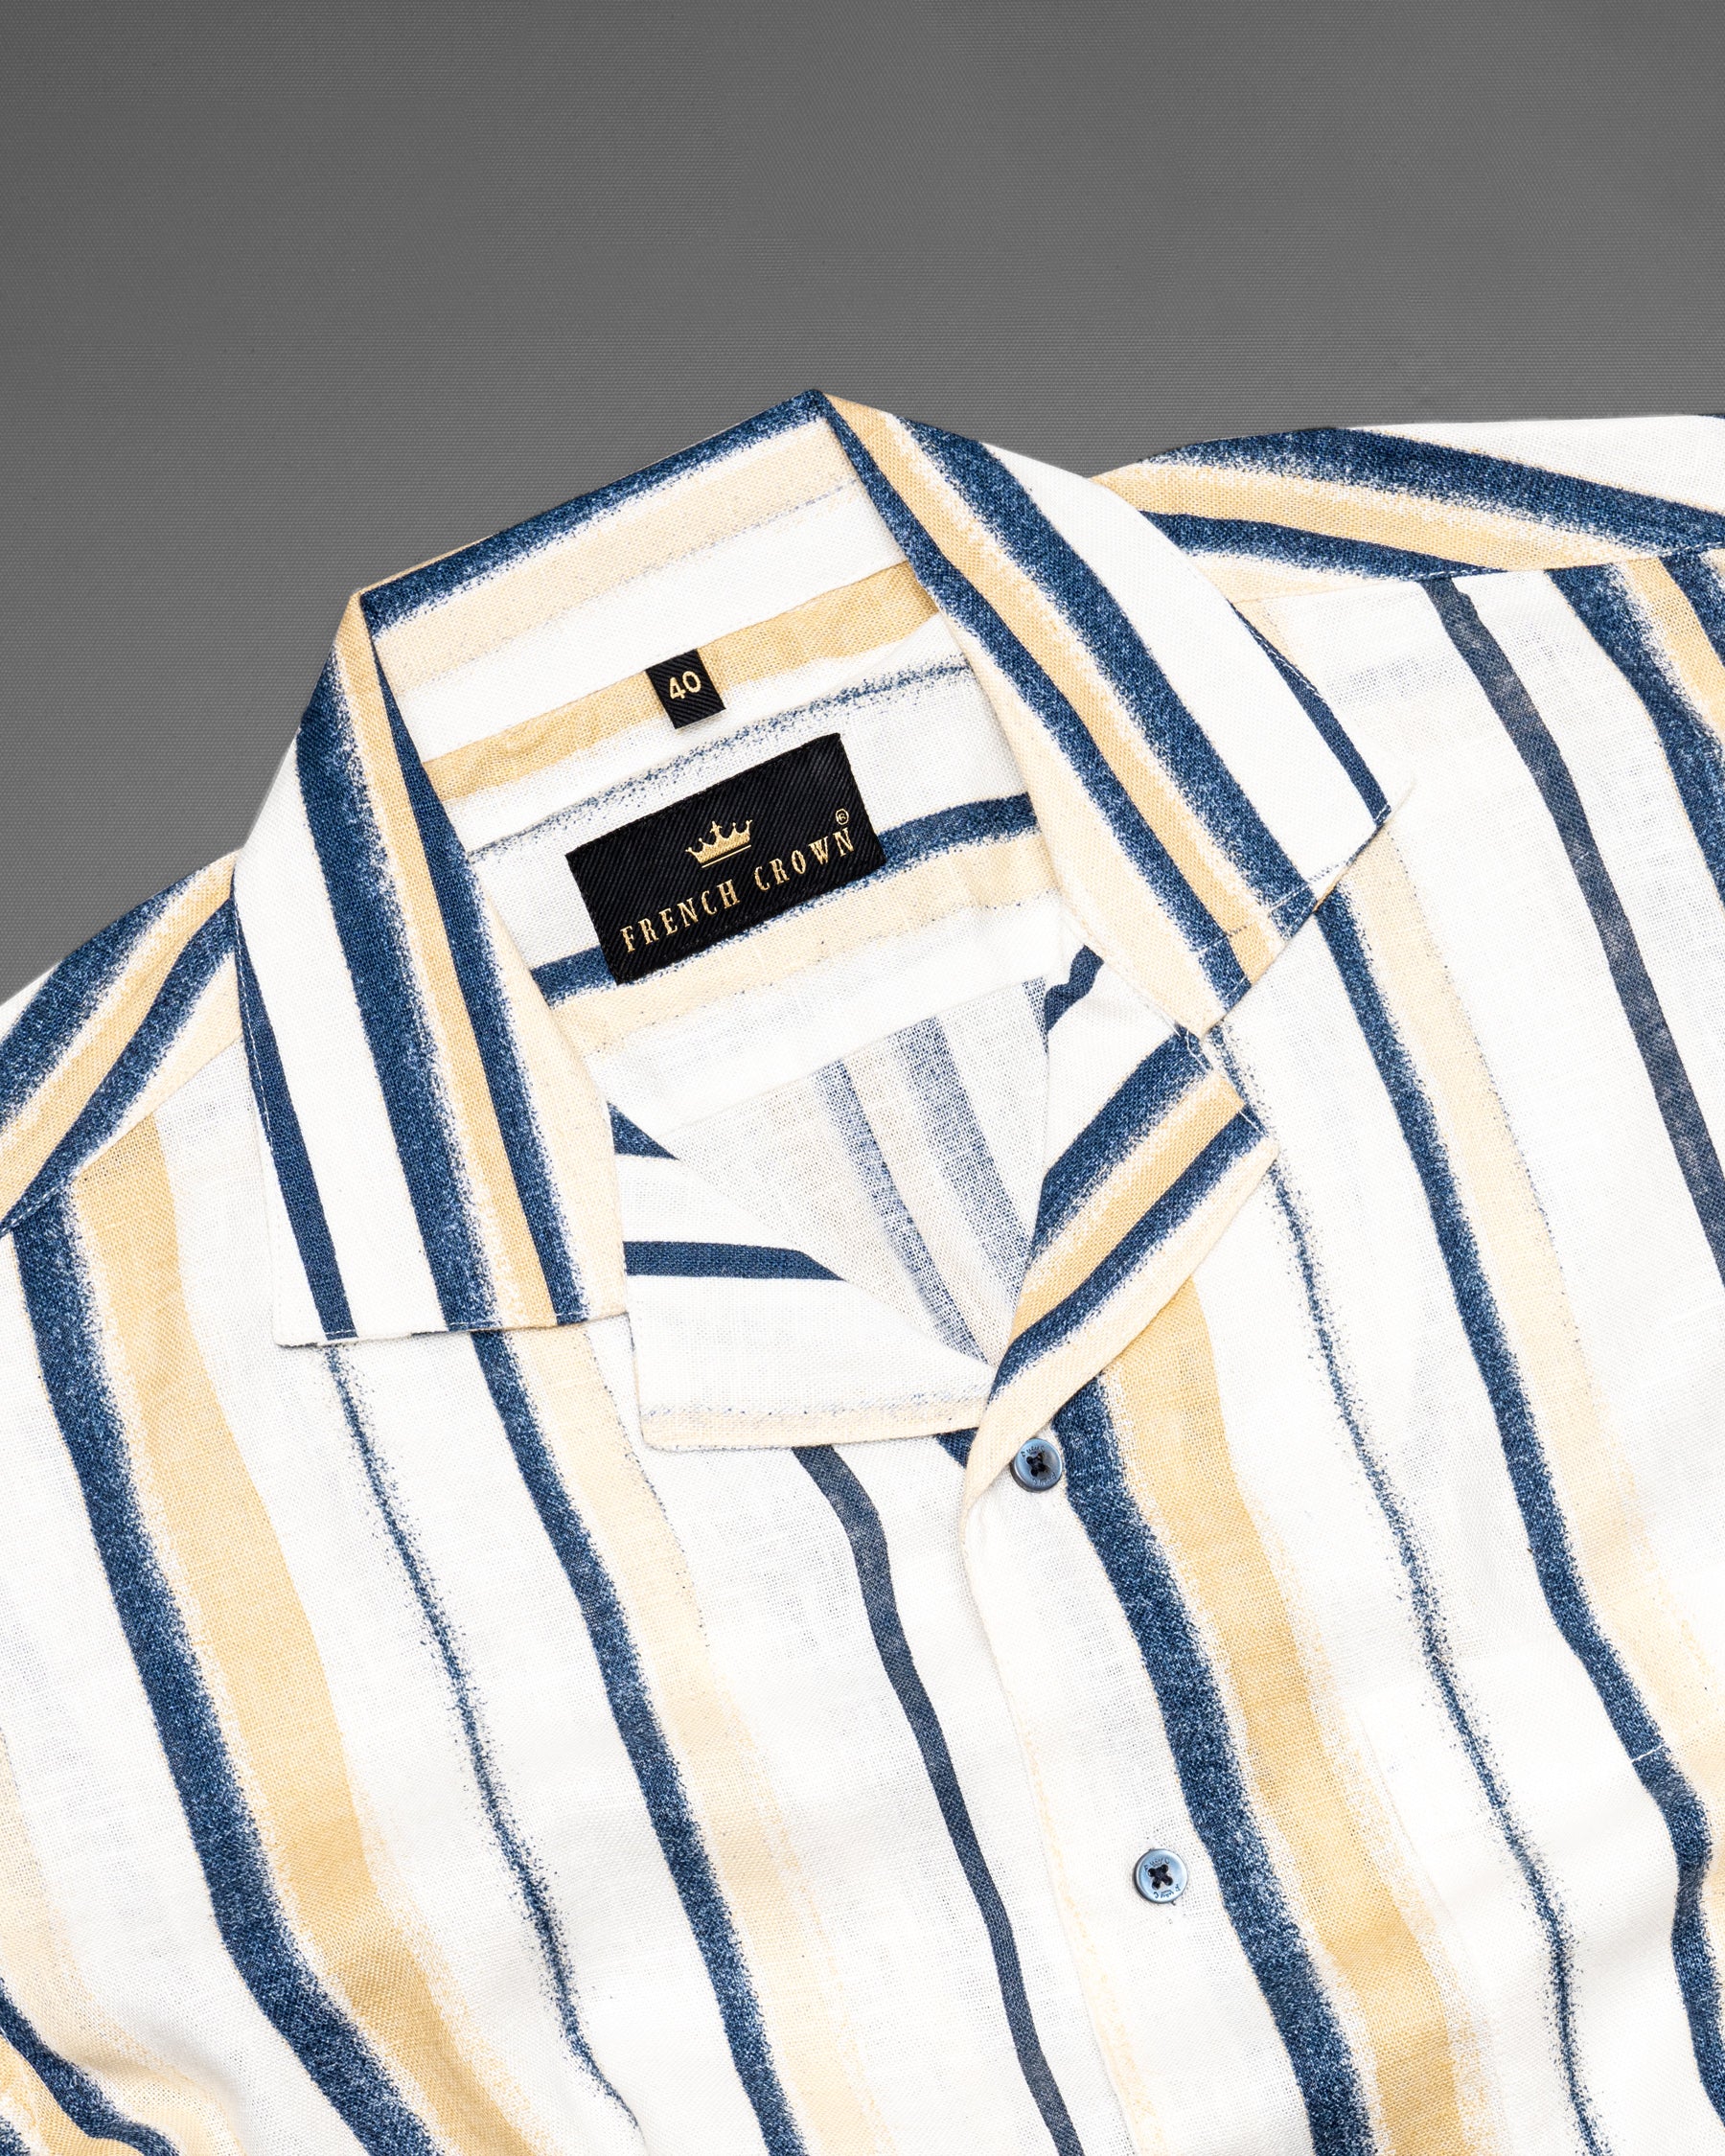 off white with blue faded striped printed Luxurious Linen Cuban collar Shirt 5186-CC-BLE-38, 5186-CC-BLE-H-38, 5186-CC-BLE-39, 5186-CC-BLE-H-39, 5186-CC-BLE-40, 5186-CC-BLE-H-40, 5186-CC-BLE-42, 5186-CC-BLE-H-42, 5186-CC-BLE-44, 5186-CC-BLE-H-44, 5186-CC-BLE-46, 5186-CC-BLE-H-46, 5186-CC-BLE-48, 5186-CC-BLE-H-48, 5186-CC-BLE-50, 5186-CC-BLE-H-50, 5186-CC-BLE-52, 5186-CC-BLE-H-52